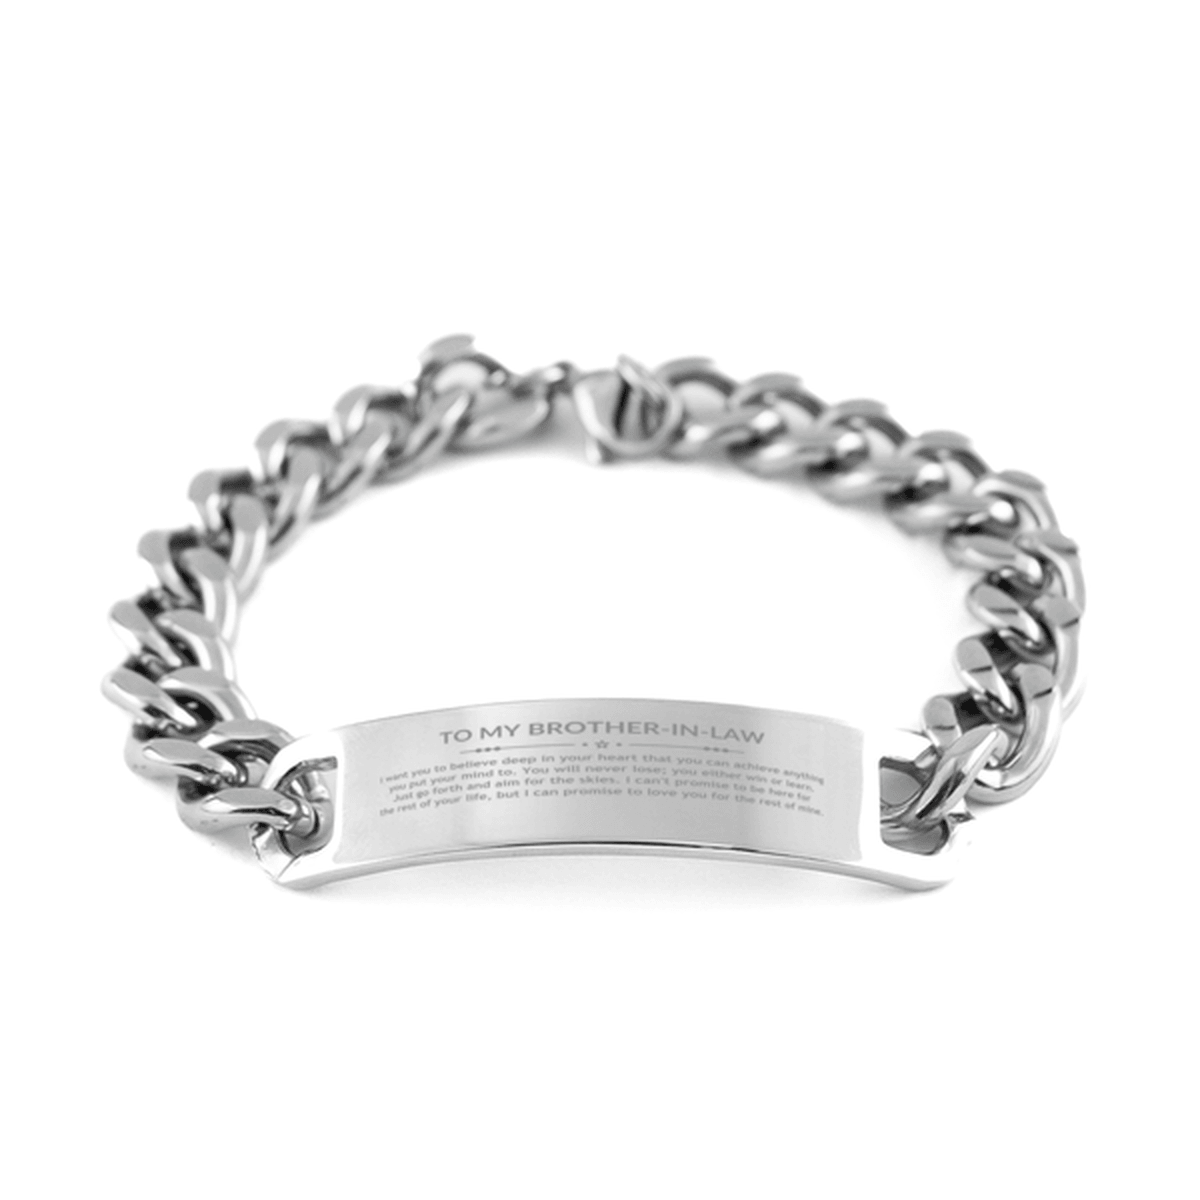 Motivational Brother-in-law Cuban Chain Stainless Steel Bracelet, Brother In Law I can promise to love you for the rest of mine, Christmas, Birthday Jewelry Gift - Mallard Moon Gift Shop